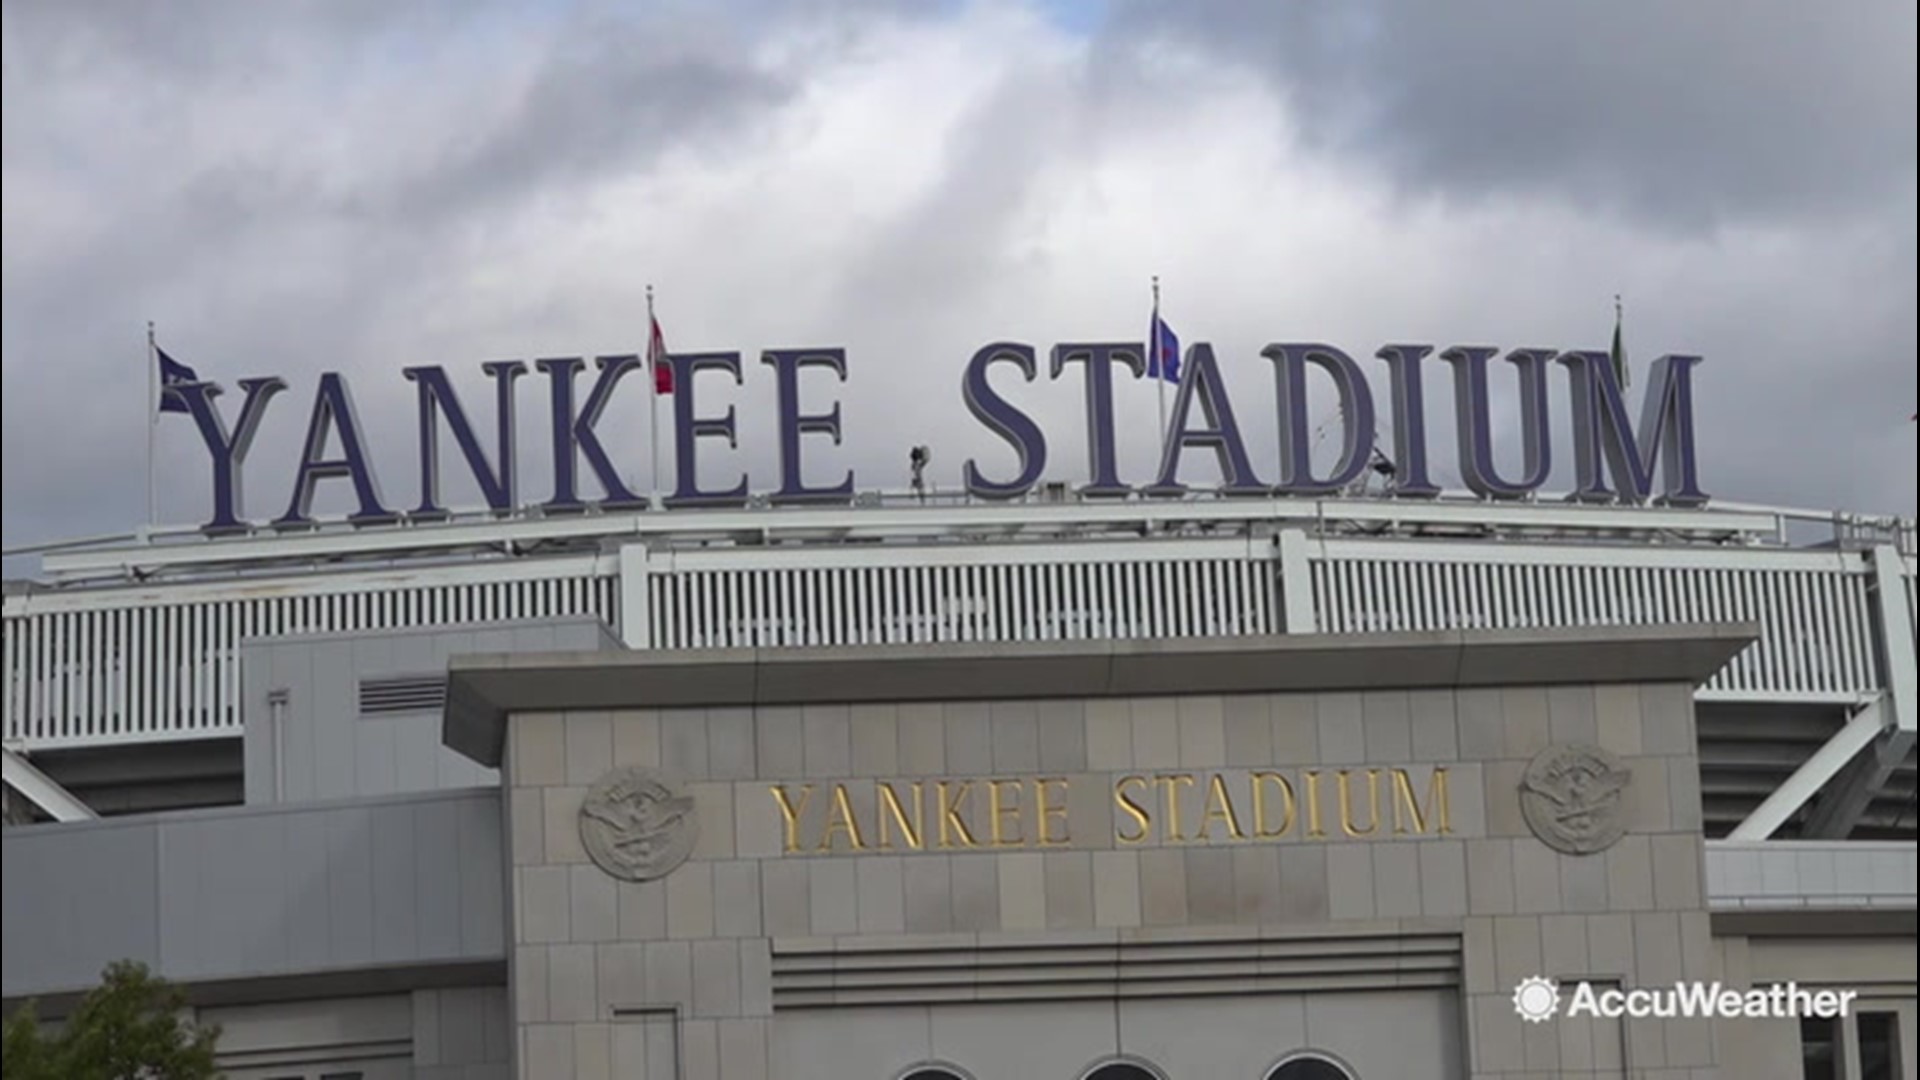 The Bronx, New York, suffered some major weather problems that delayed the American League Championship Series a day. Jonathan Petramala was in front of Yankee Stadium on Oct. 17, with the details on this story.